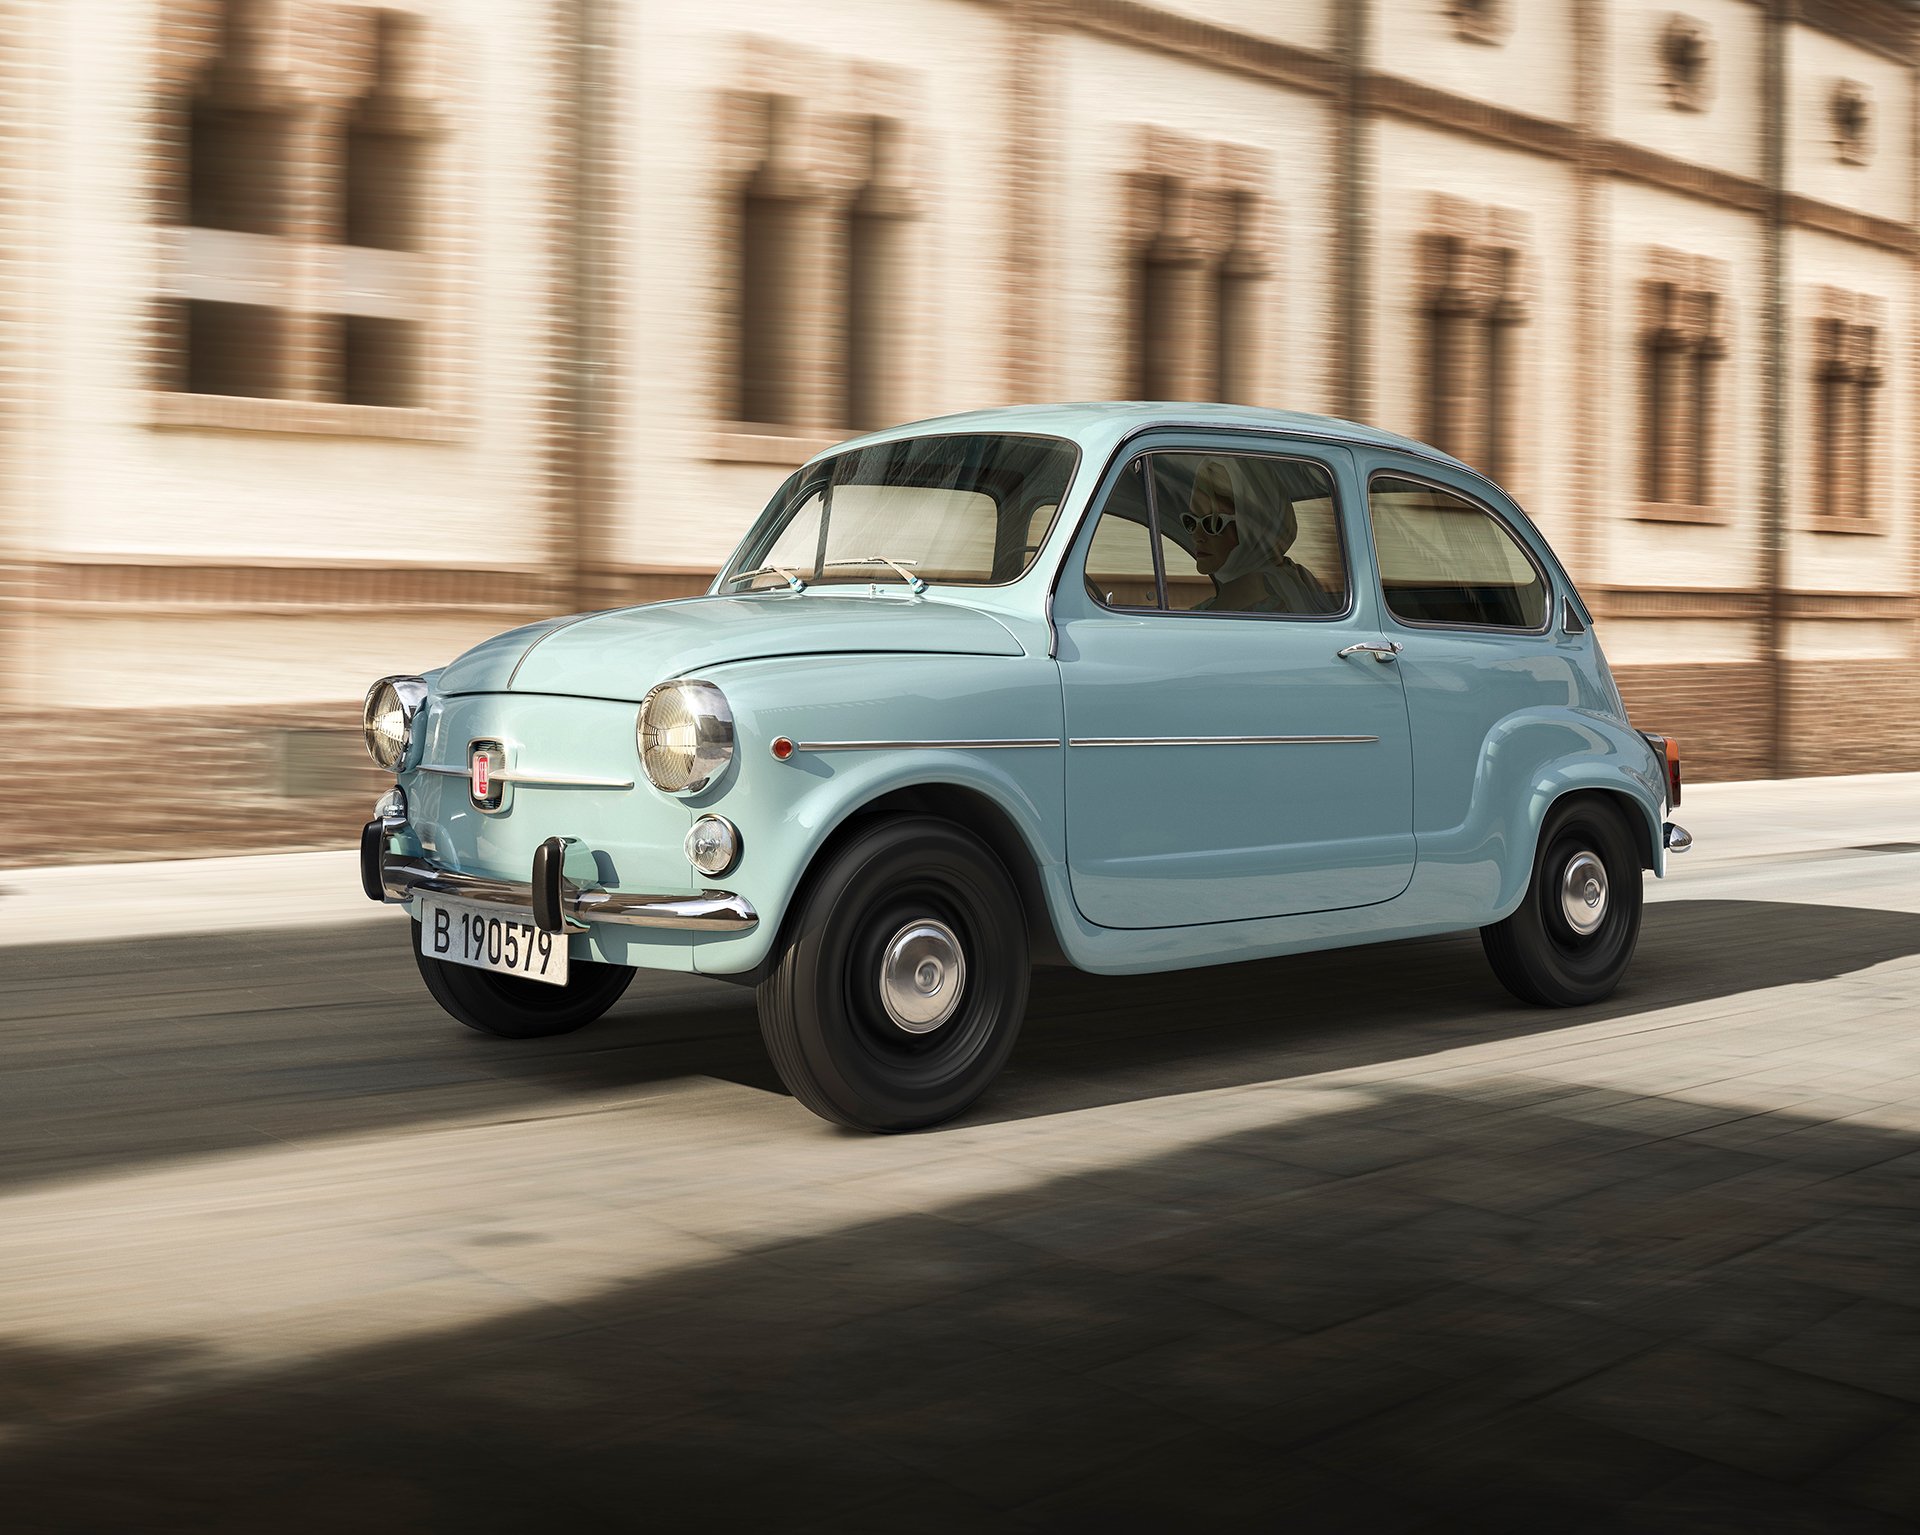 CGI Dynamic image of an historical SEAT car model. 600L Special